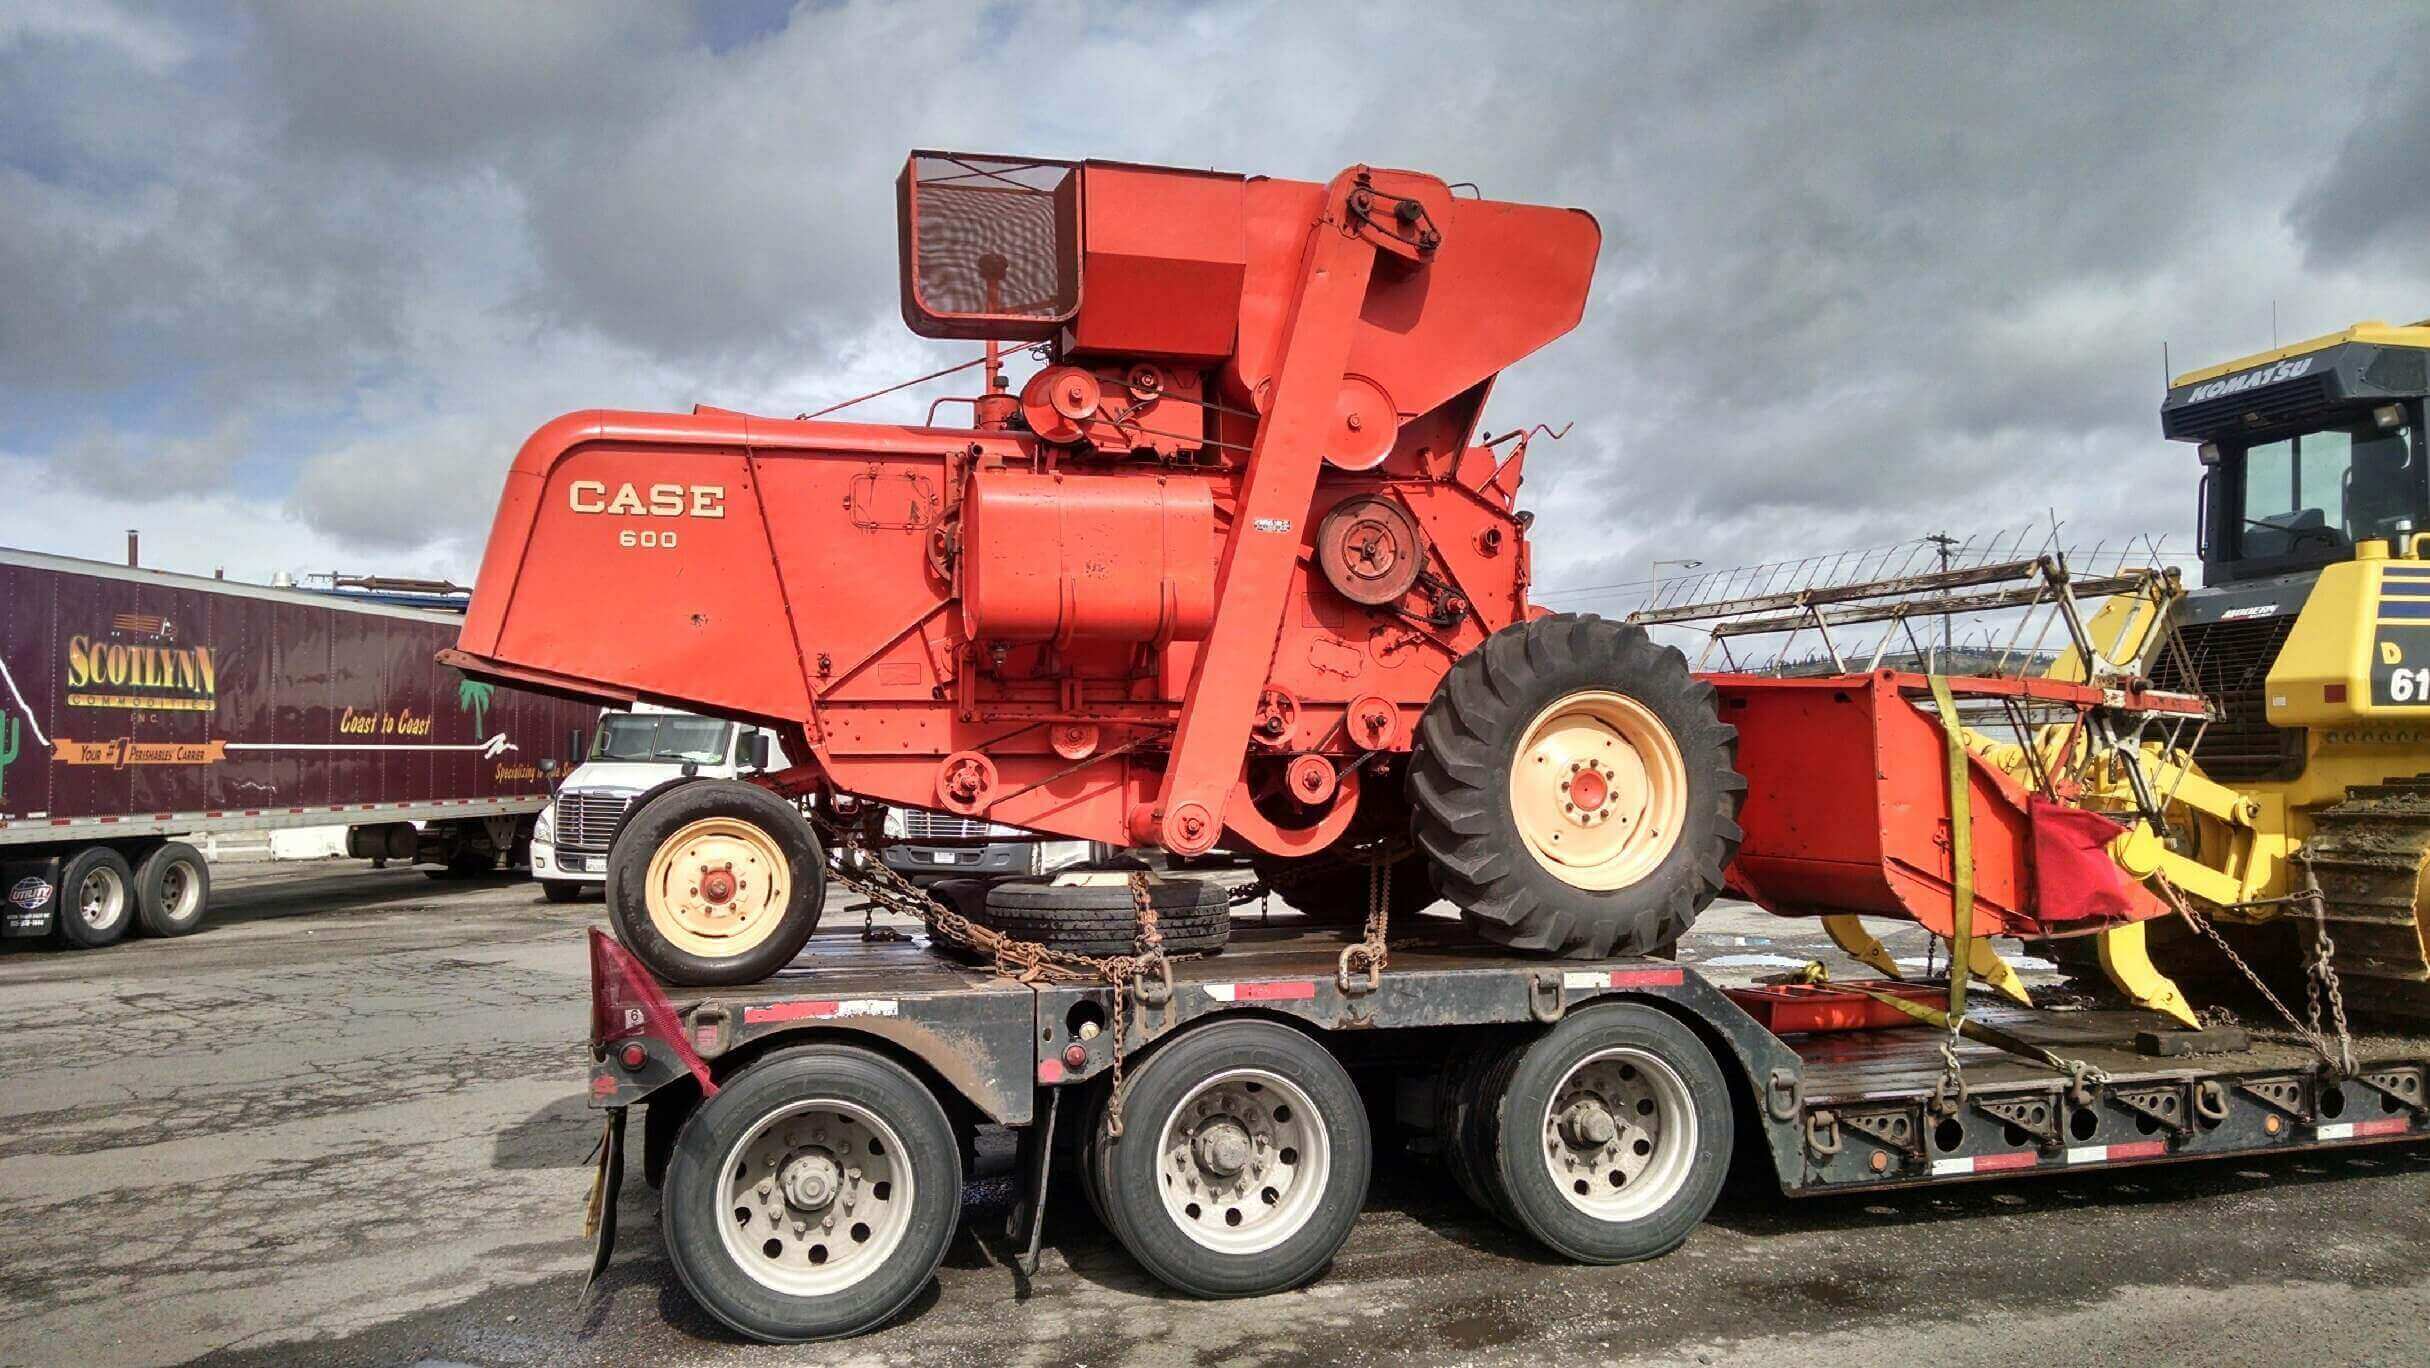 Shipping Case 600 Combine